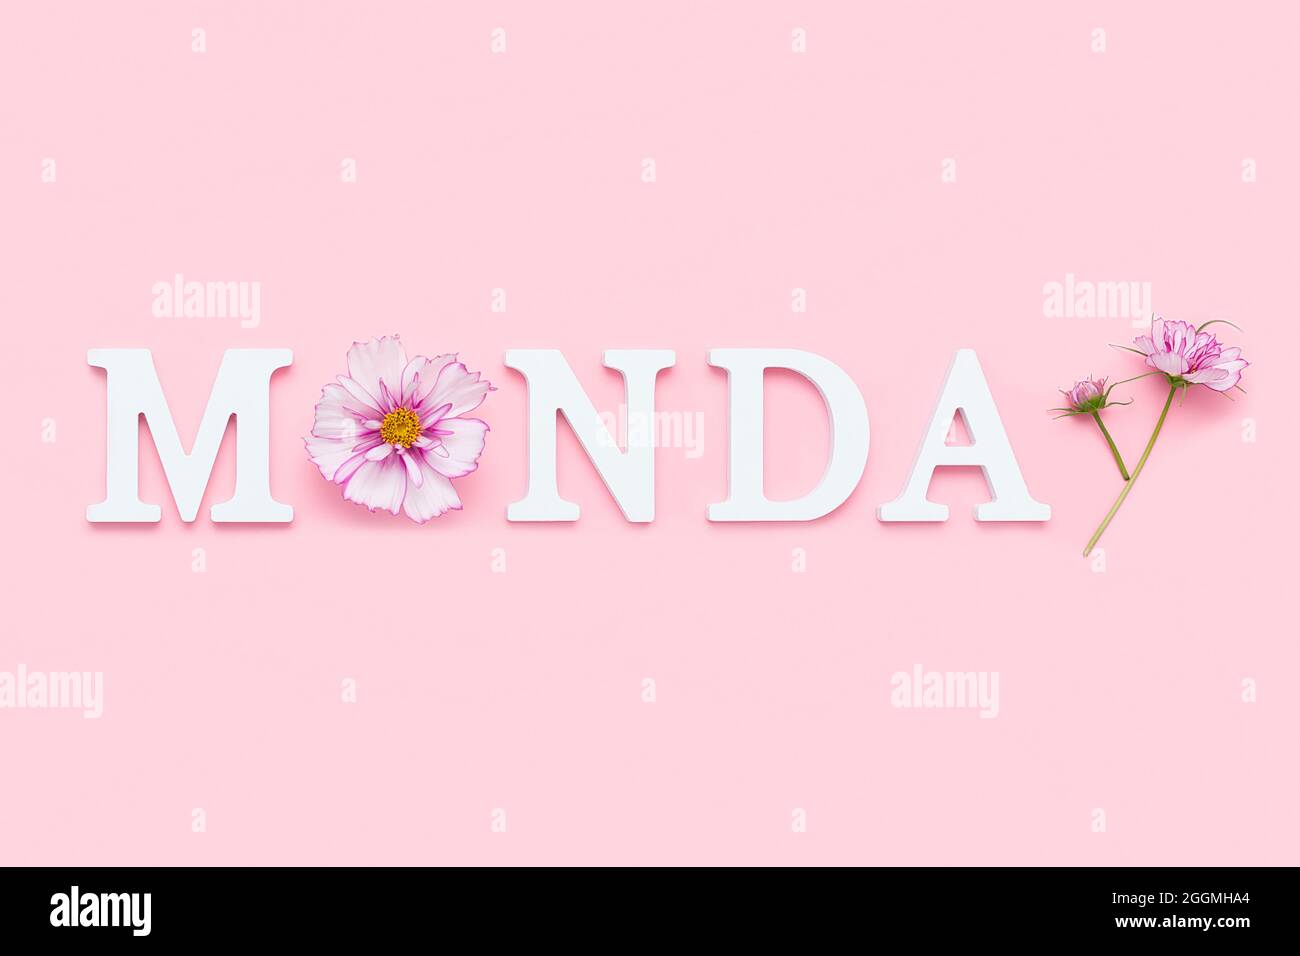 Monday. Motivational quote from white letters and beauty natural flowers on pink background. Creative concept Hello Monday, positive mood. Stock Photo